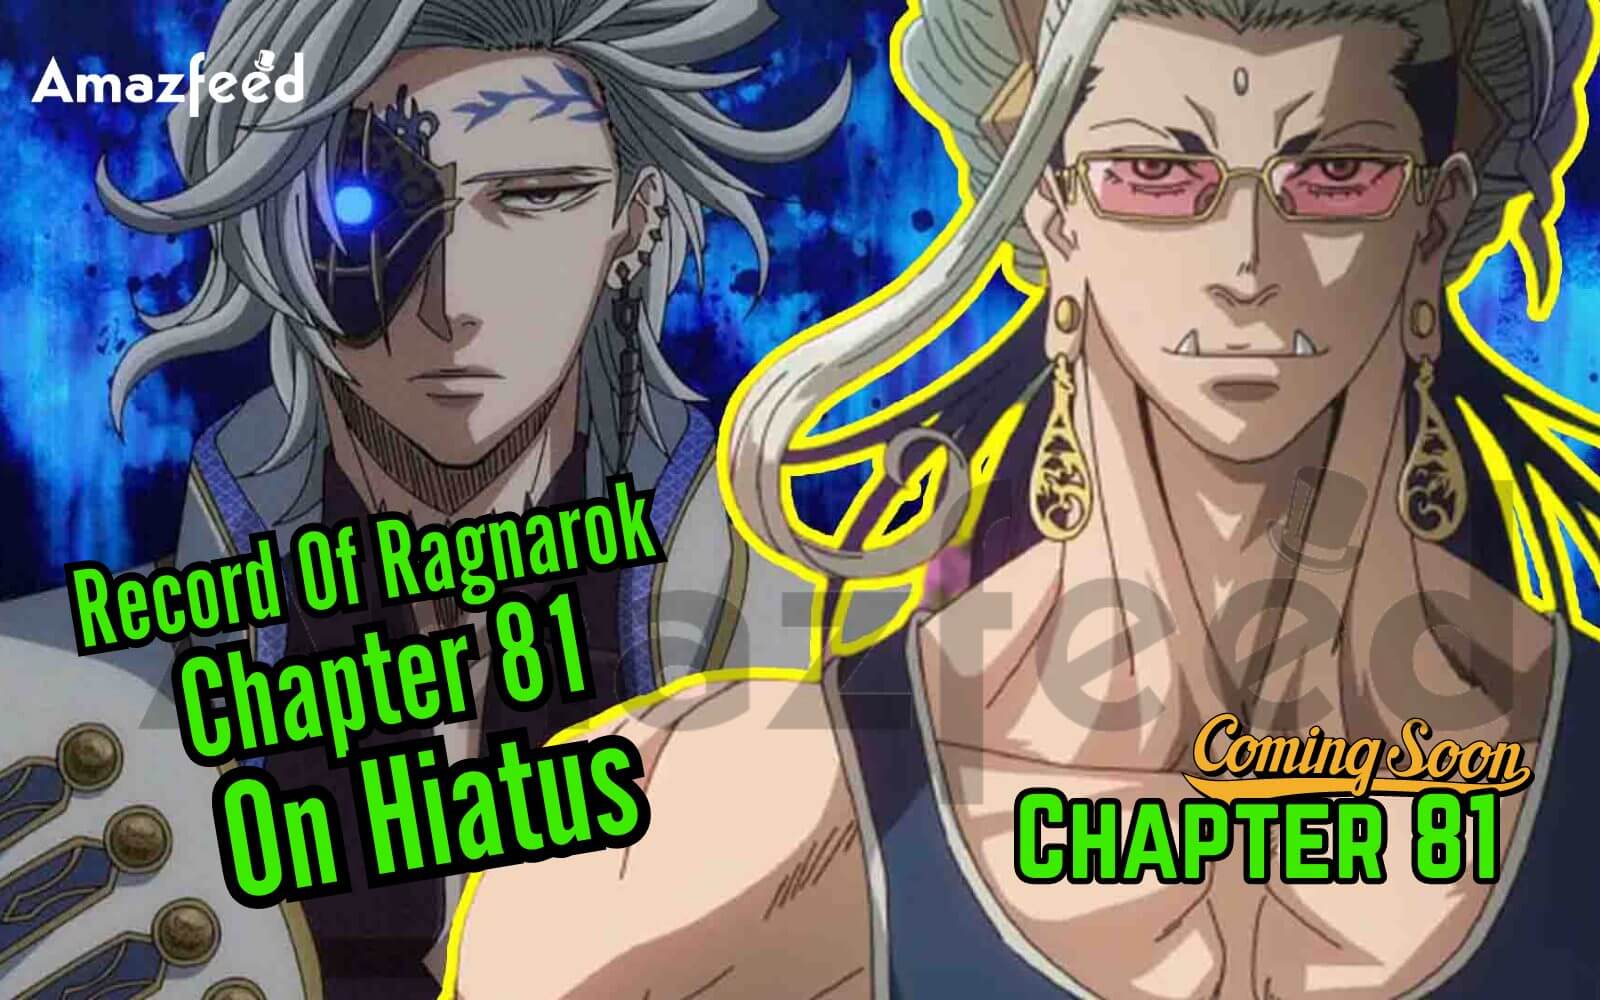 Spoilers for chapter 81 of Record of Ragnarok ⚠️ Apollo will